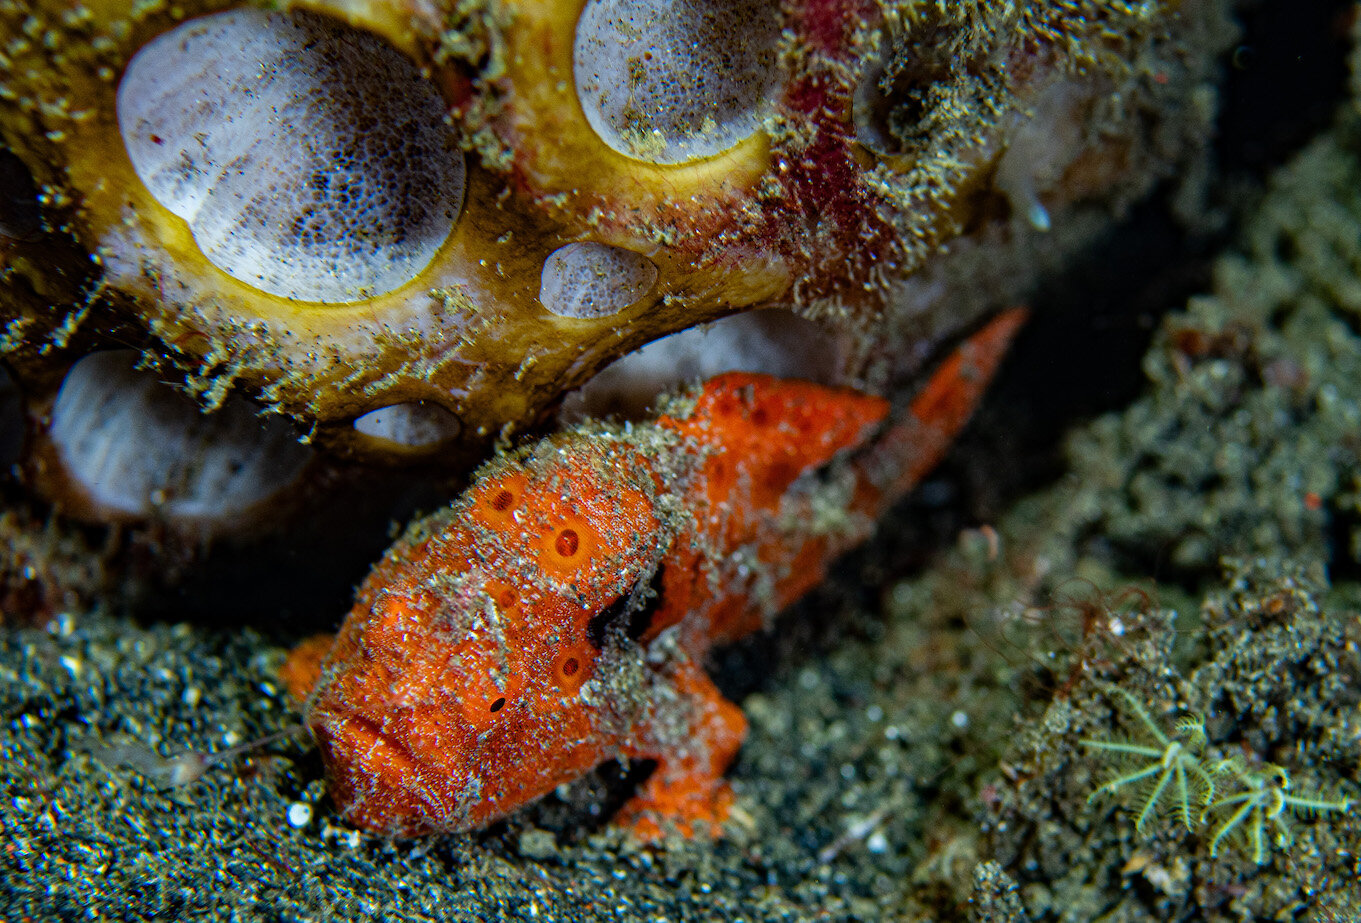 Lembeh Indonesia Frogfish by Laura Tesler